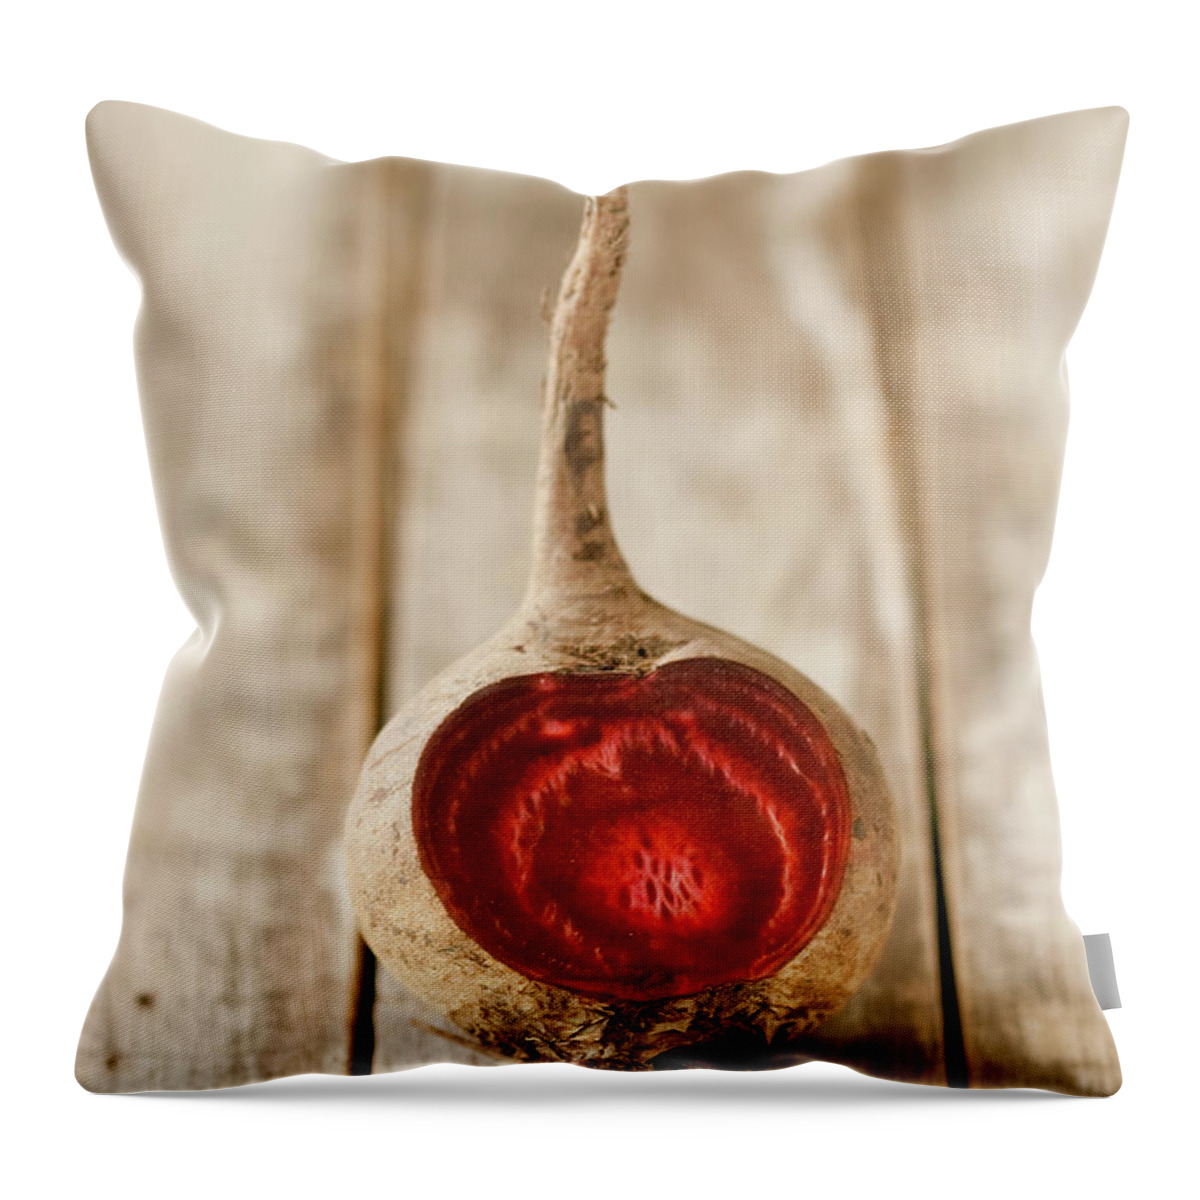 Andhra Pradesh Throw Pillow featuring the photograph Beetroot by Ashasathees Photography